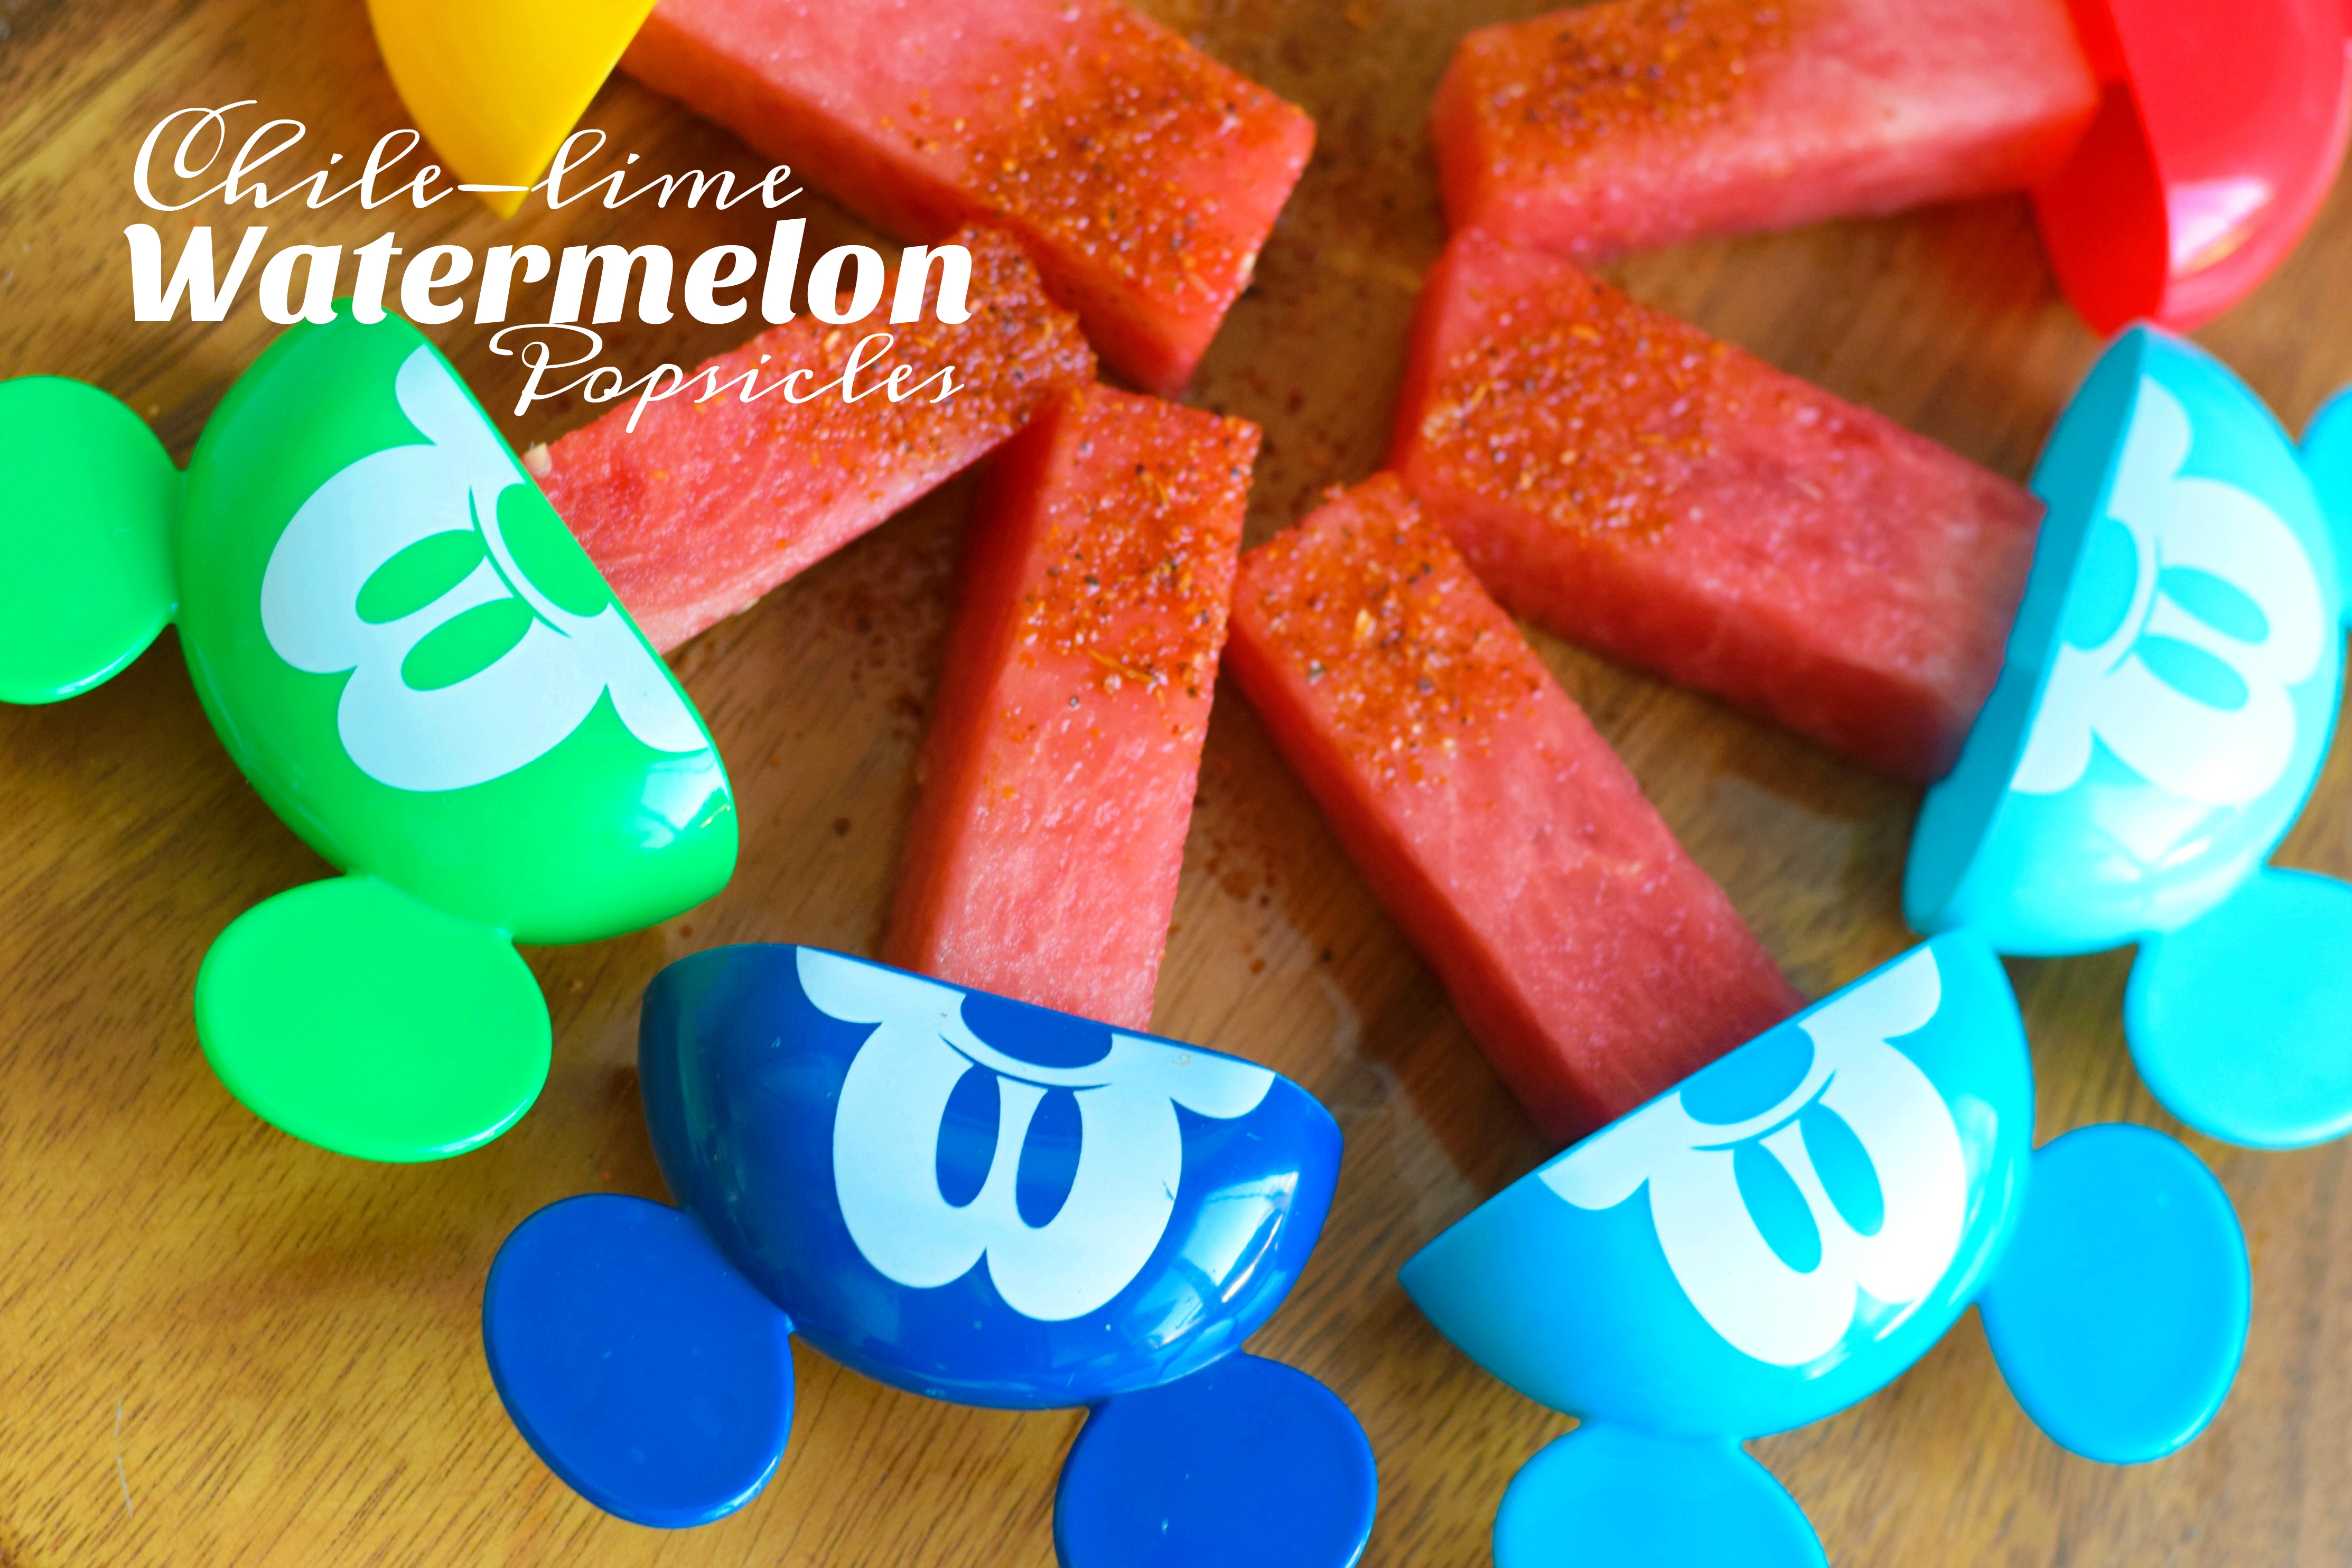 Chile-lime Watermelon Popsicles